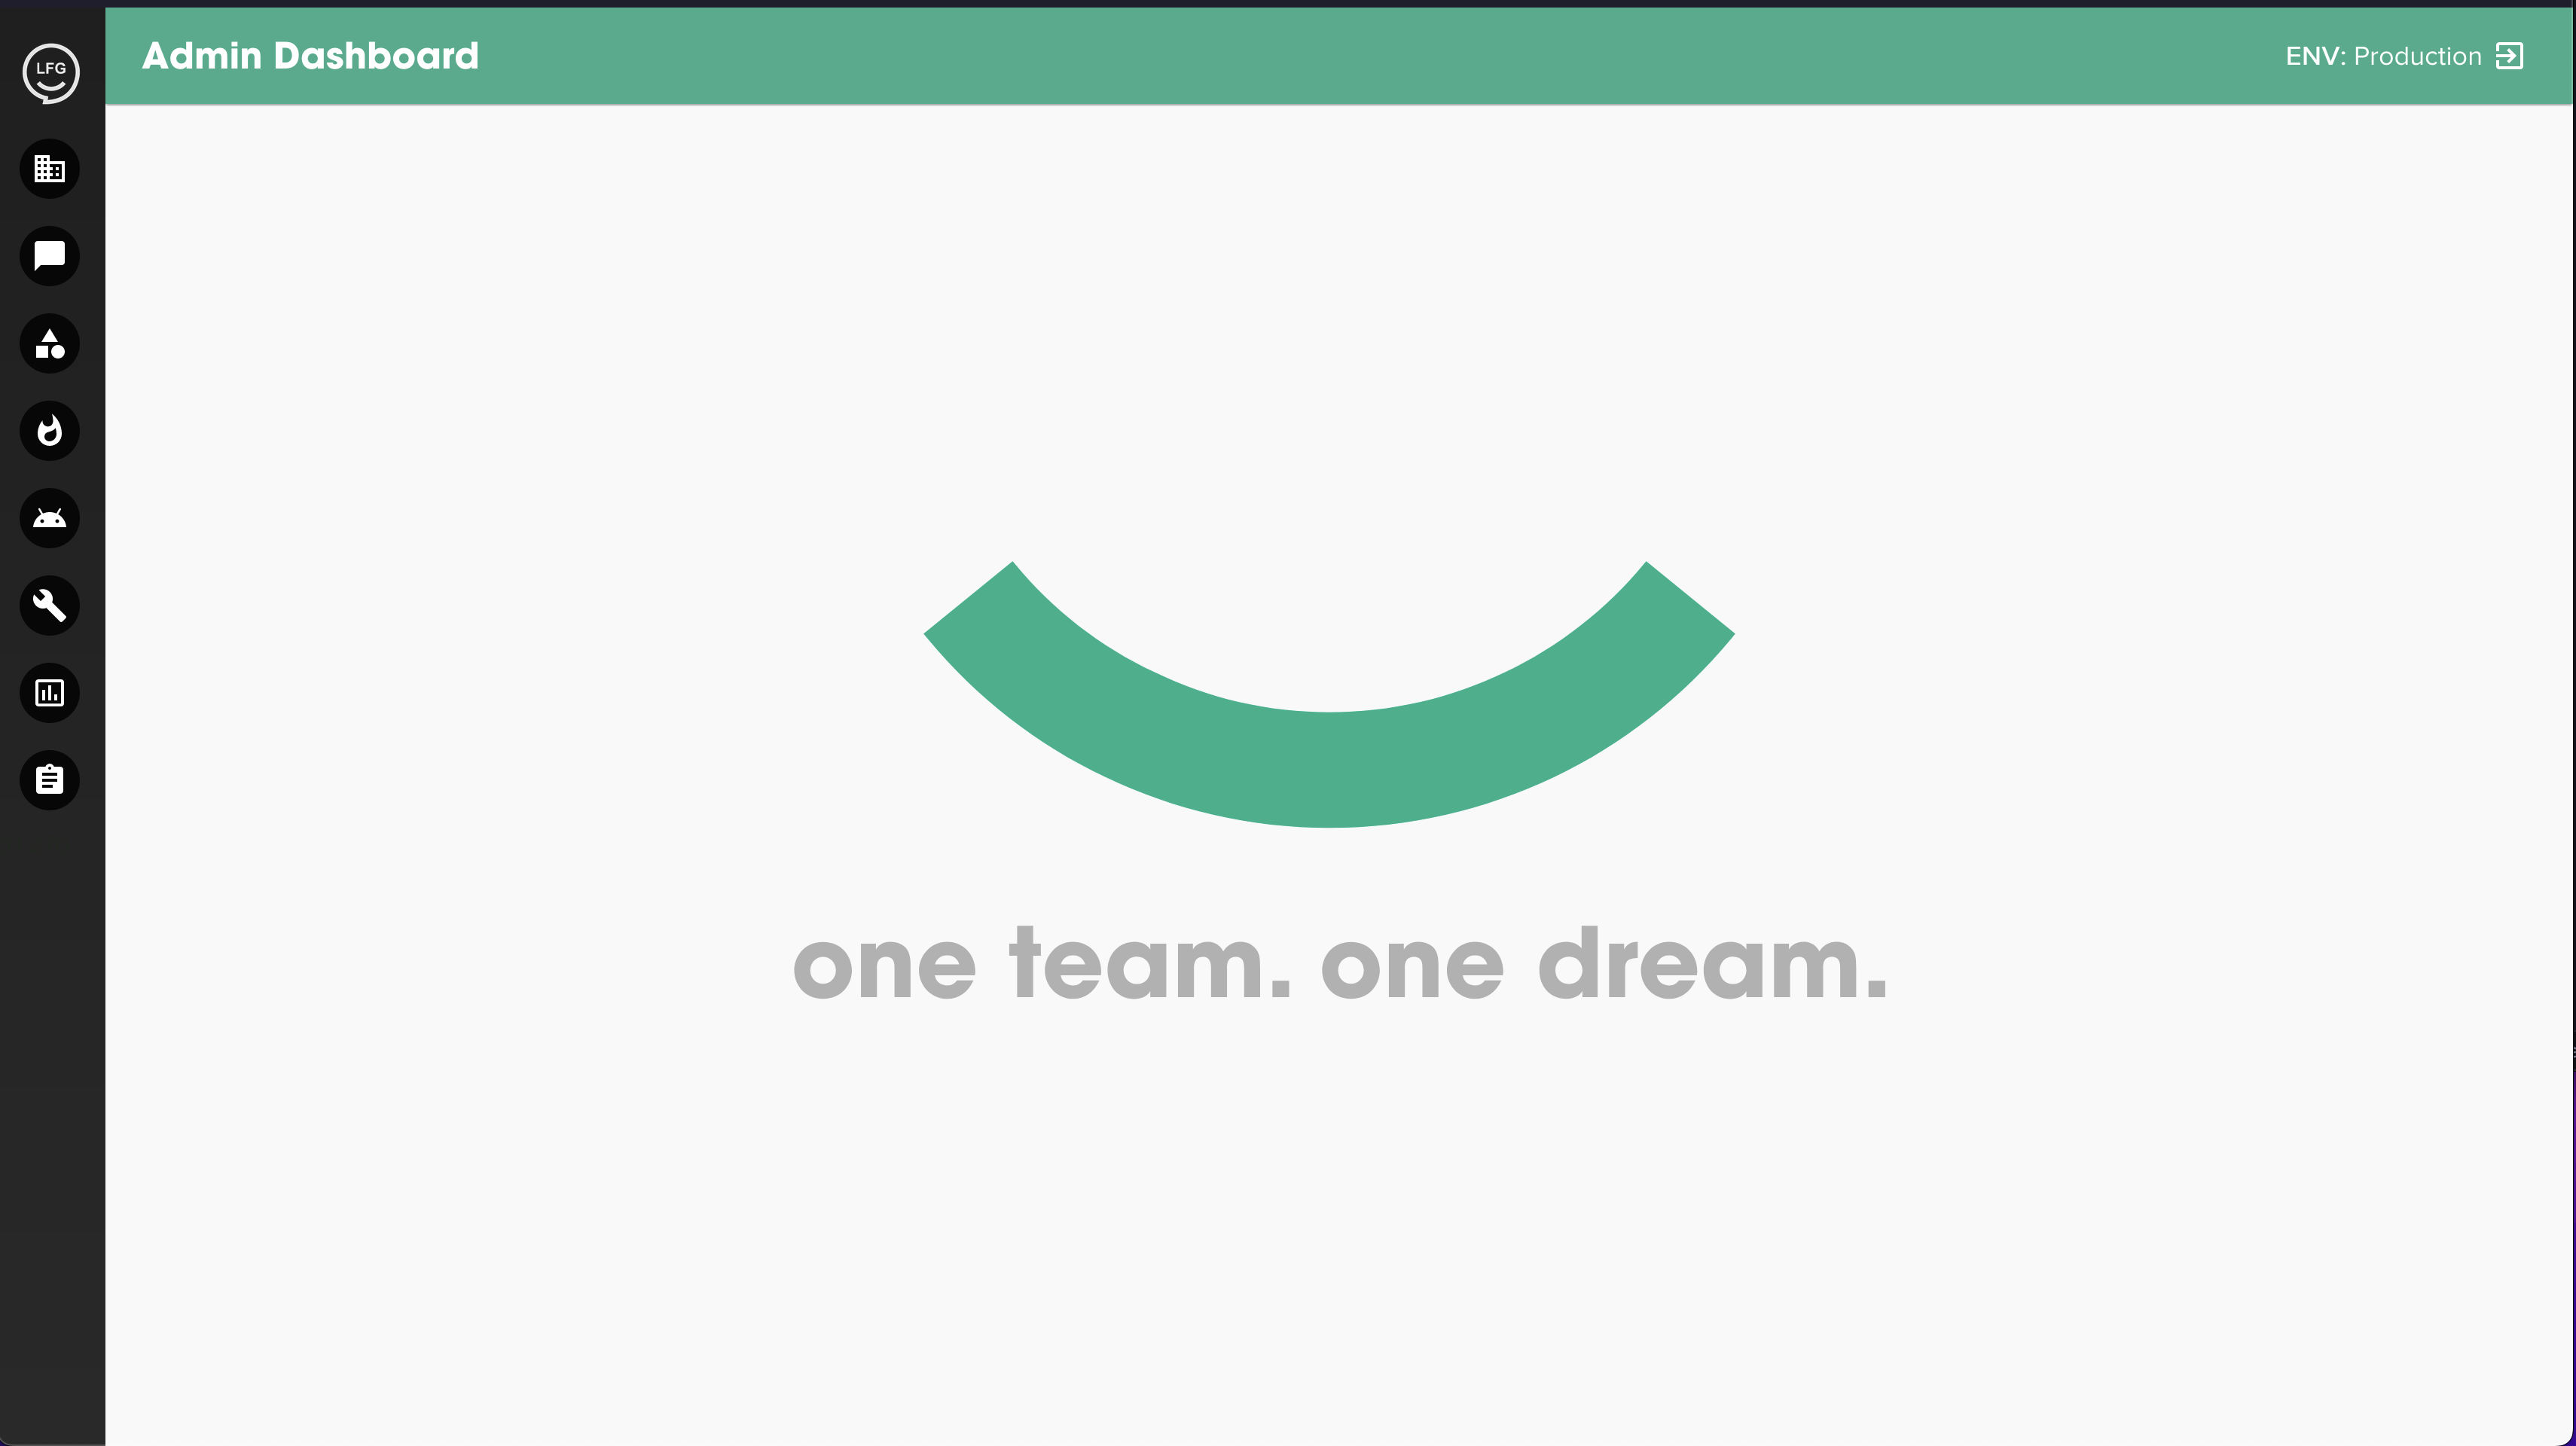 Photo of the chattr admin dashboard, text saying "one dream. one team." with the chattr logo